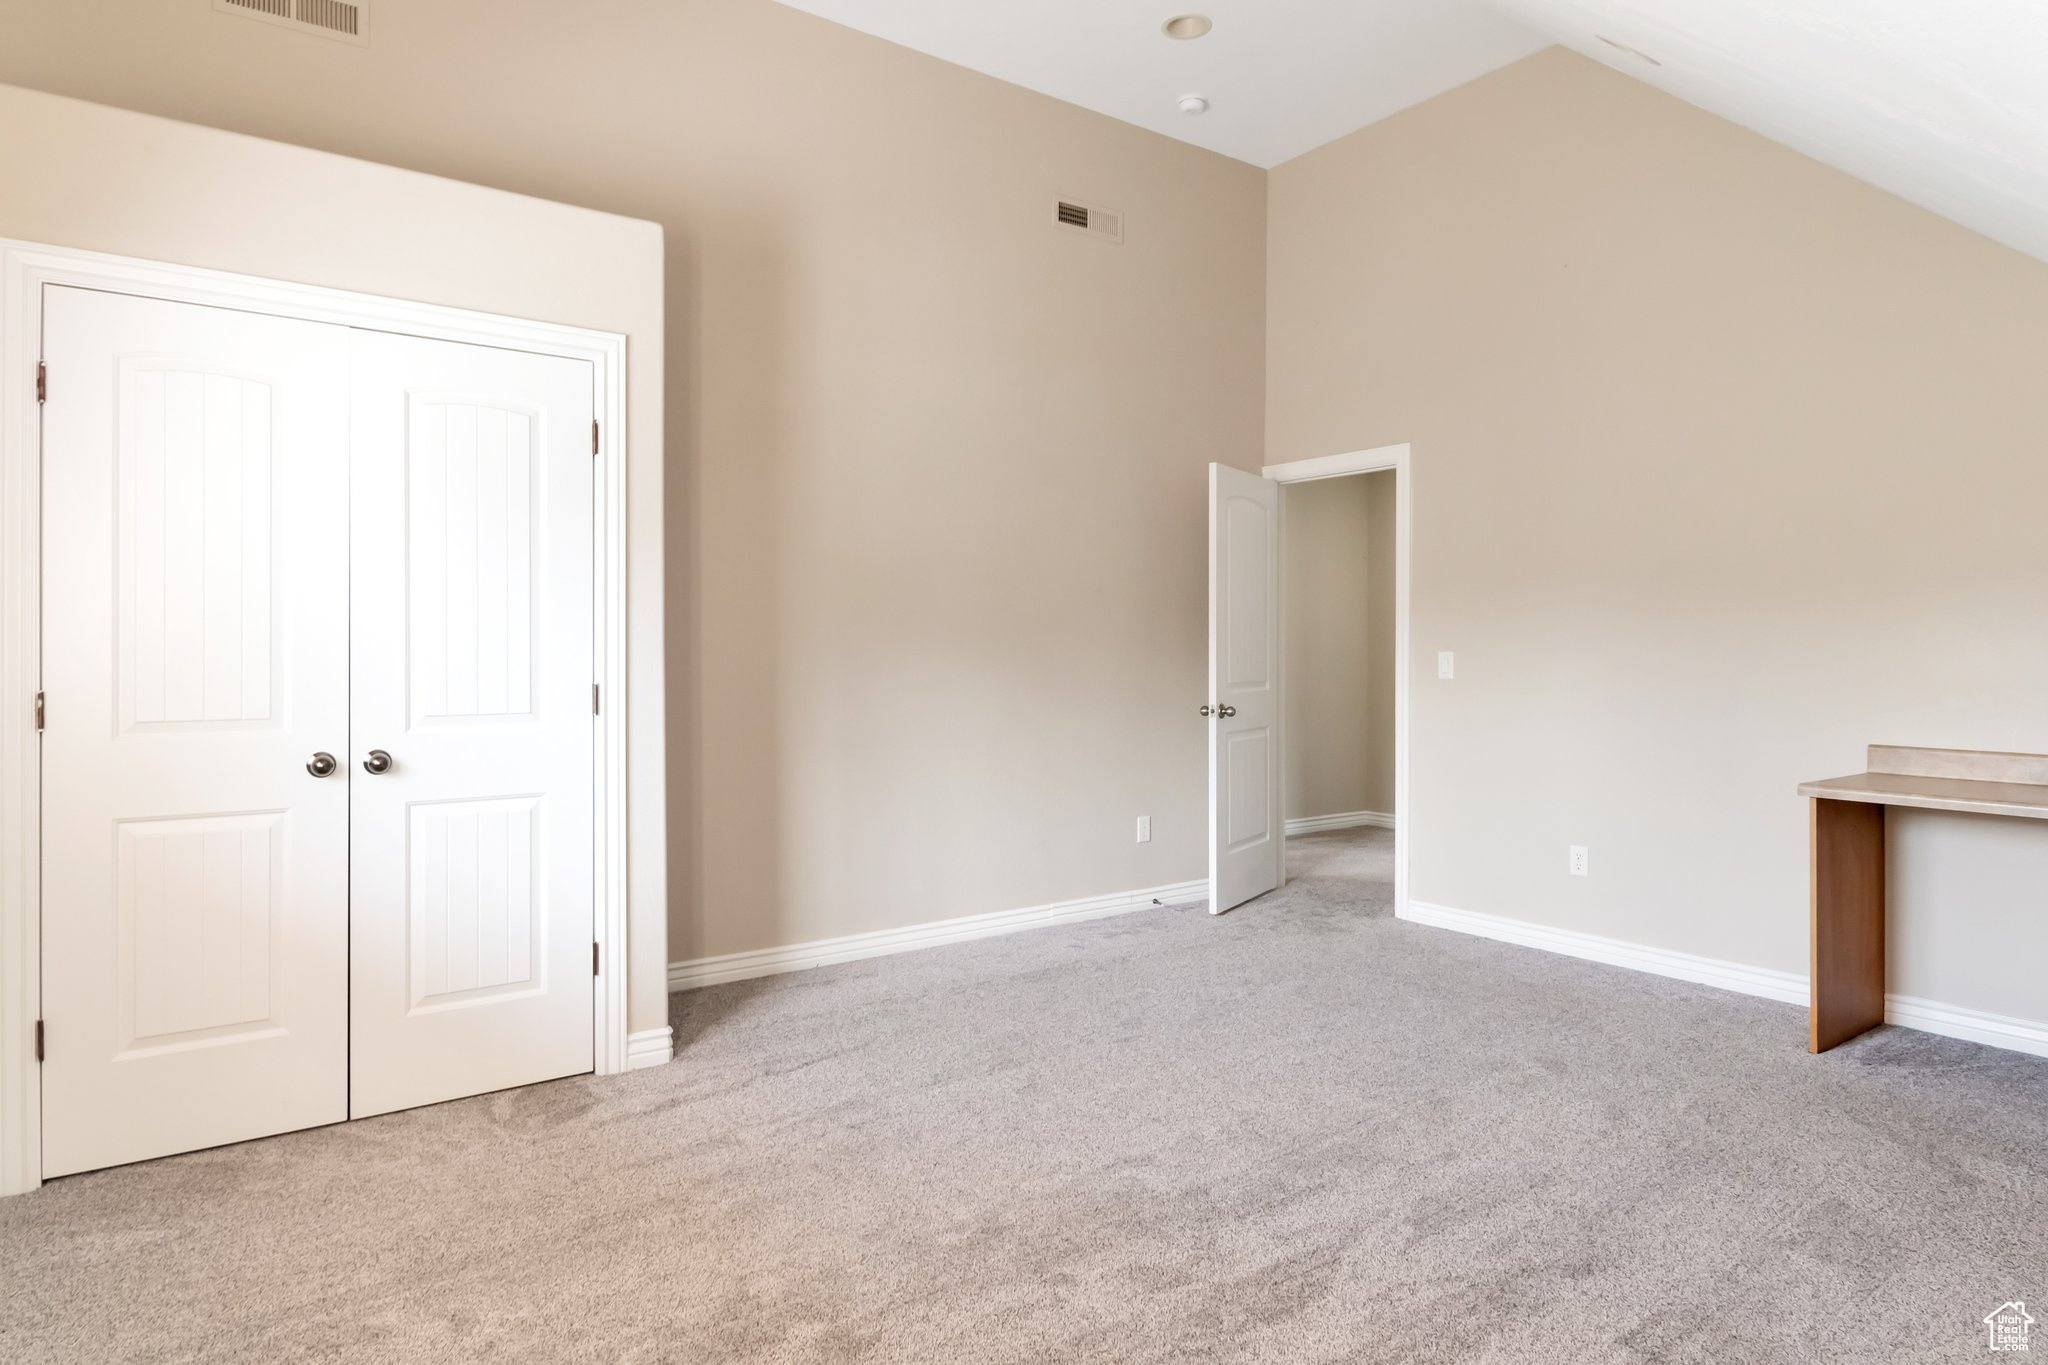 Unfurnished bedroom featuring light colored carpet, high vaulted ceiling, and a closet